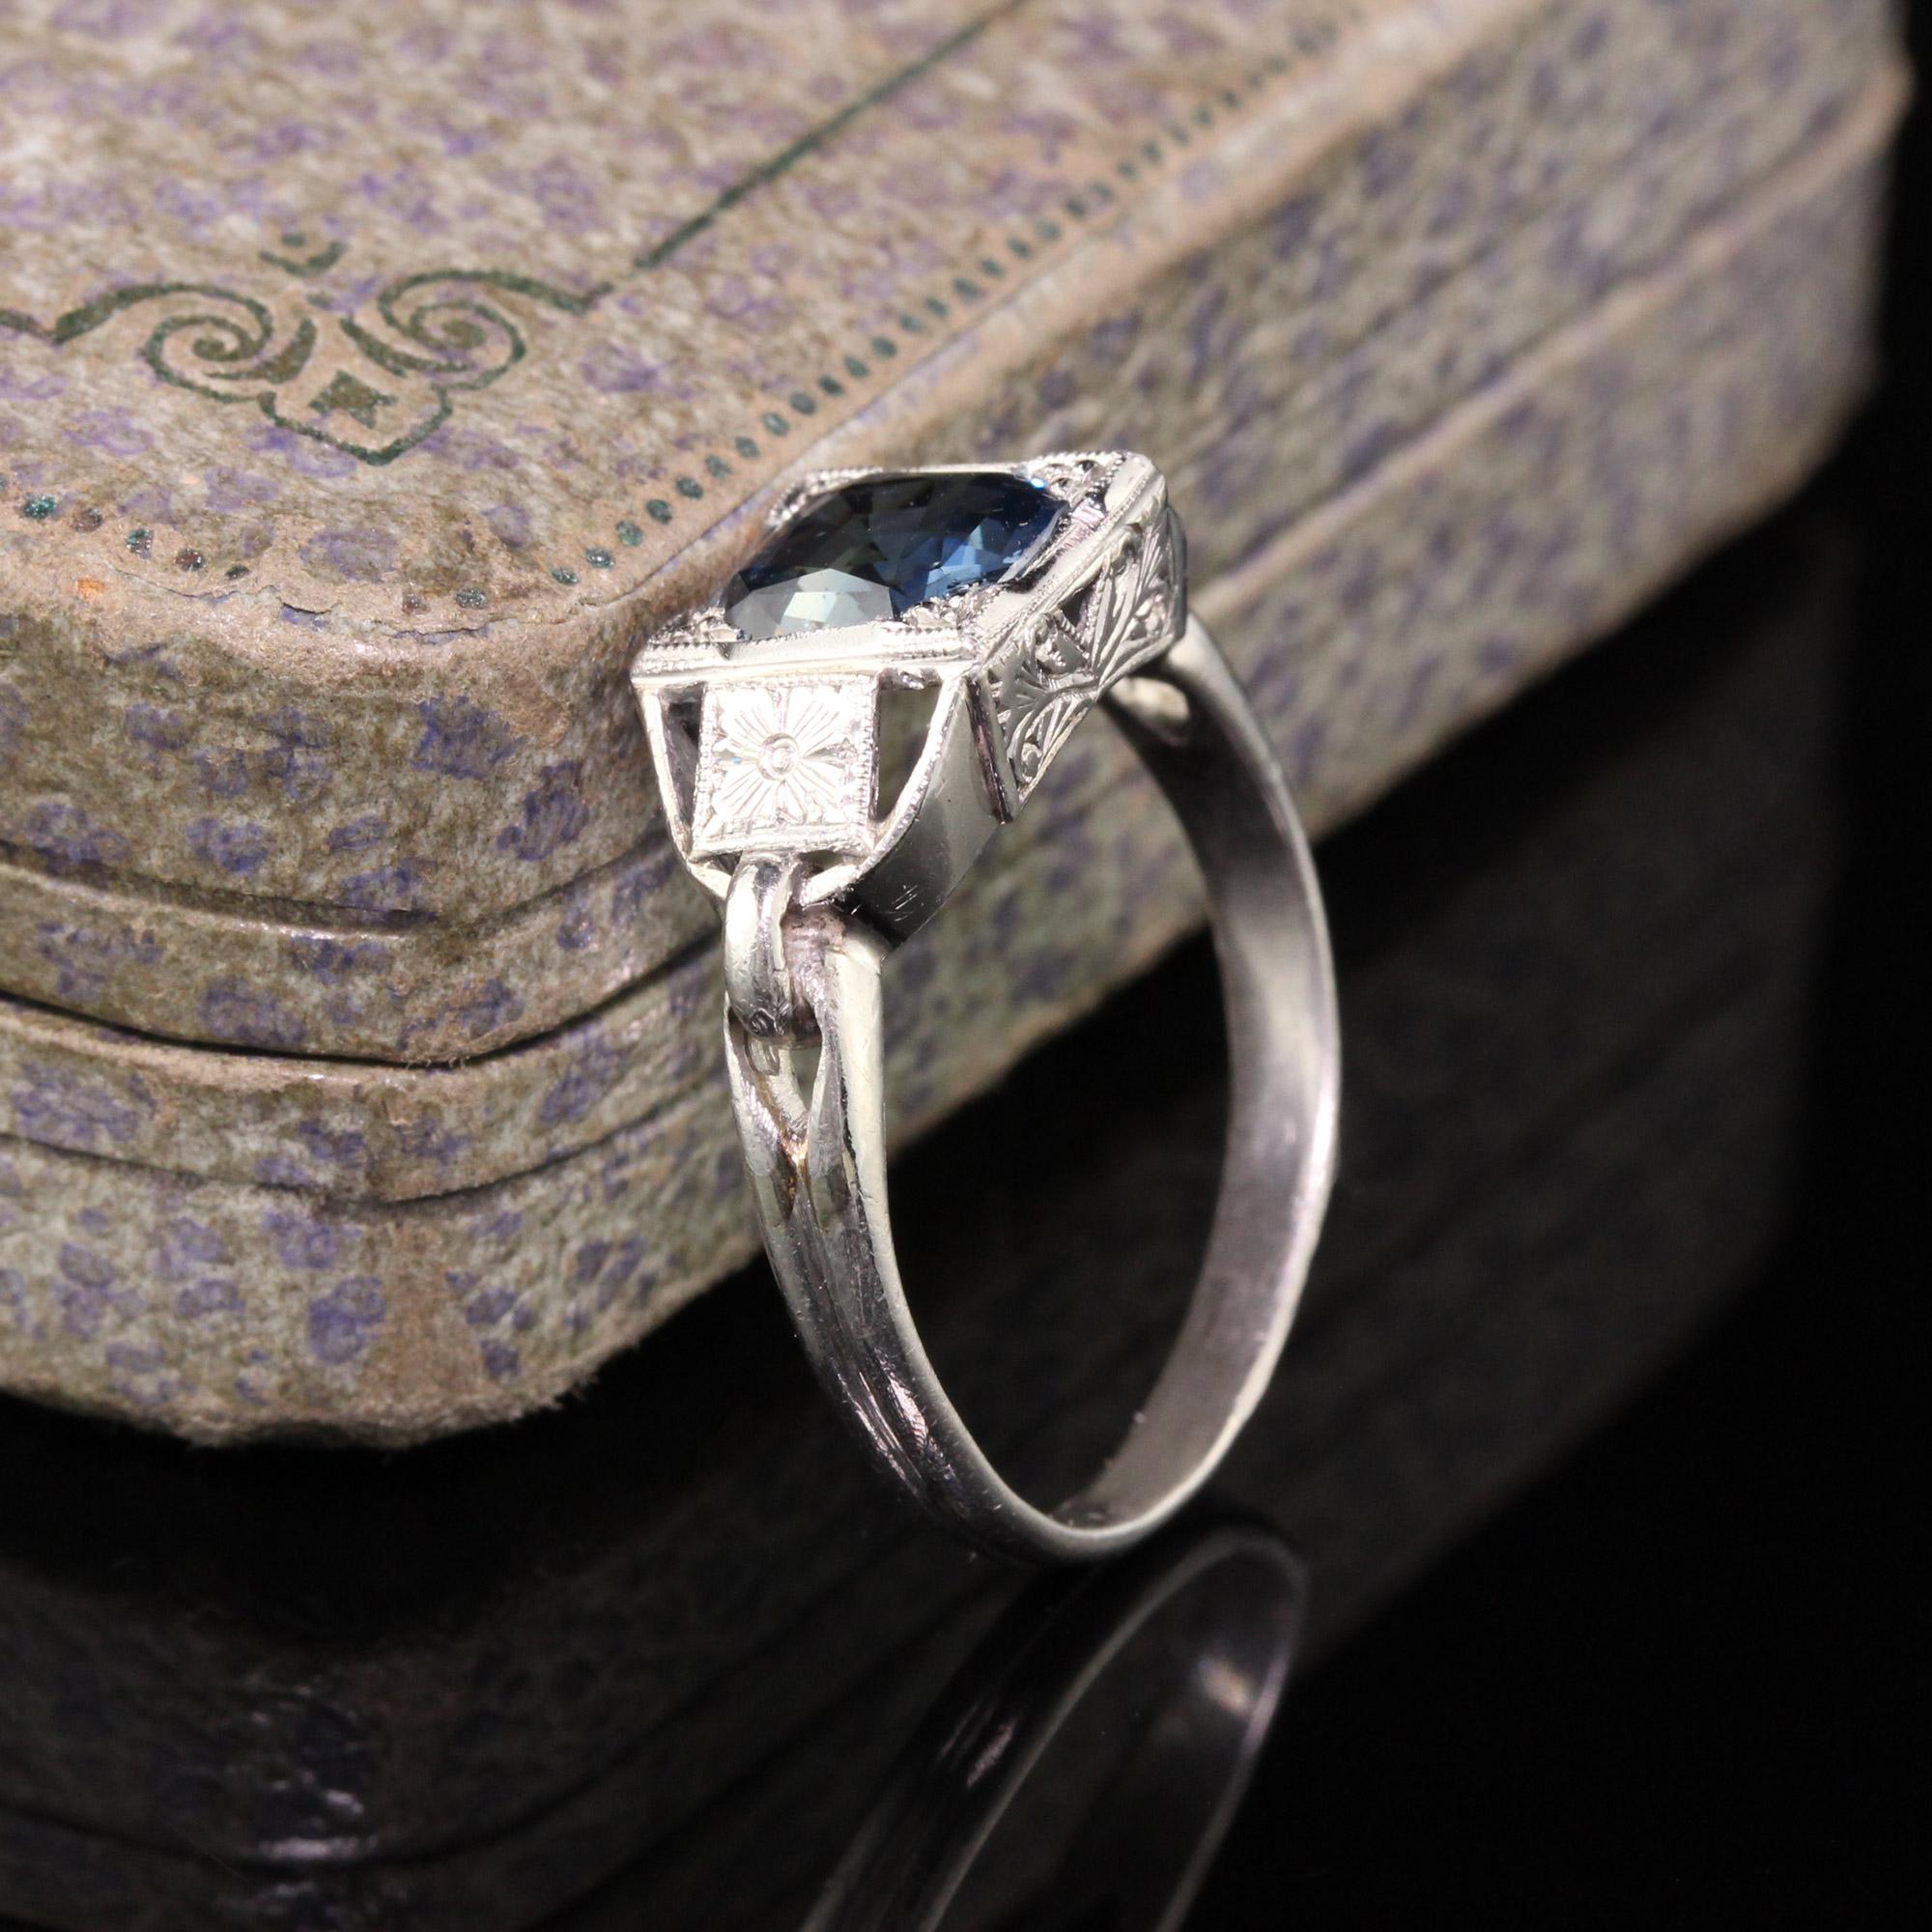 Magnificent Antique Art Deco Platinum Sapphire Engagement Ring. The sapphire is 1.99 ct in an intricate engraved art deco mounting. Truly gorgeous!

#R0598

Metal: Platinum

Weight: 5 Grams

Sapphire: Approximately 1.99 ct cushion

Ring Size: 7 3/4